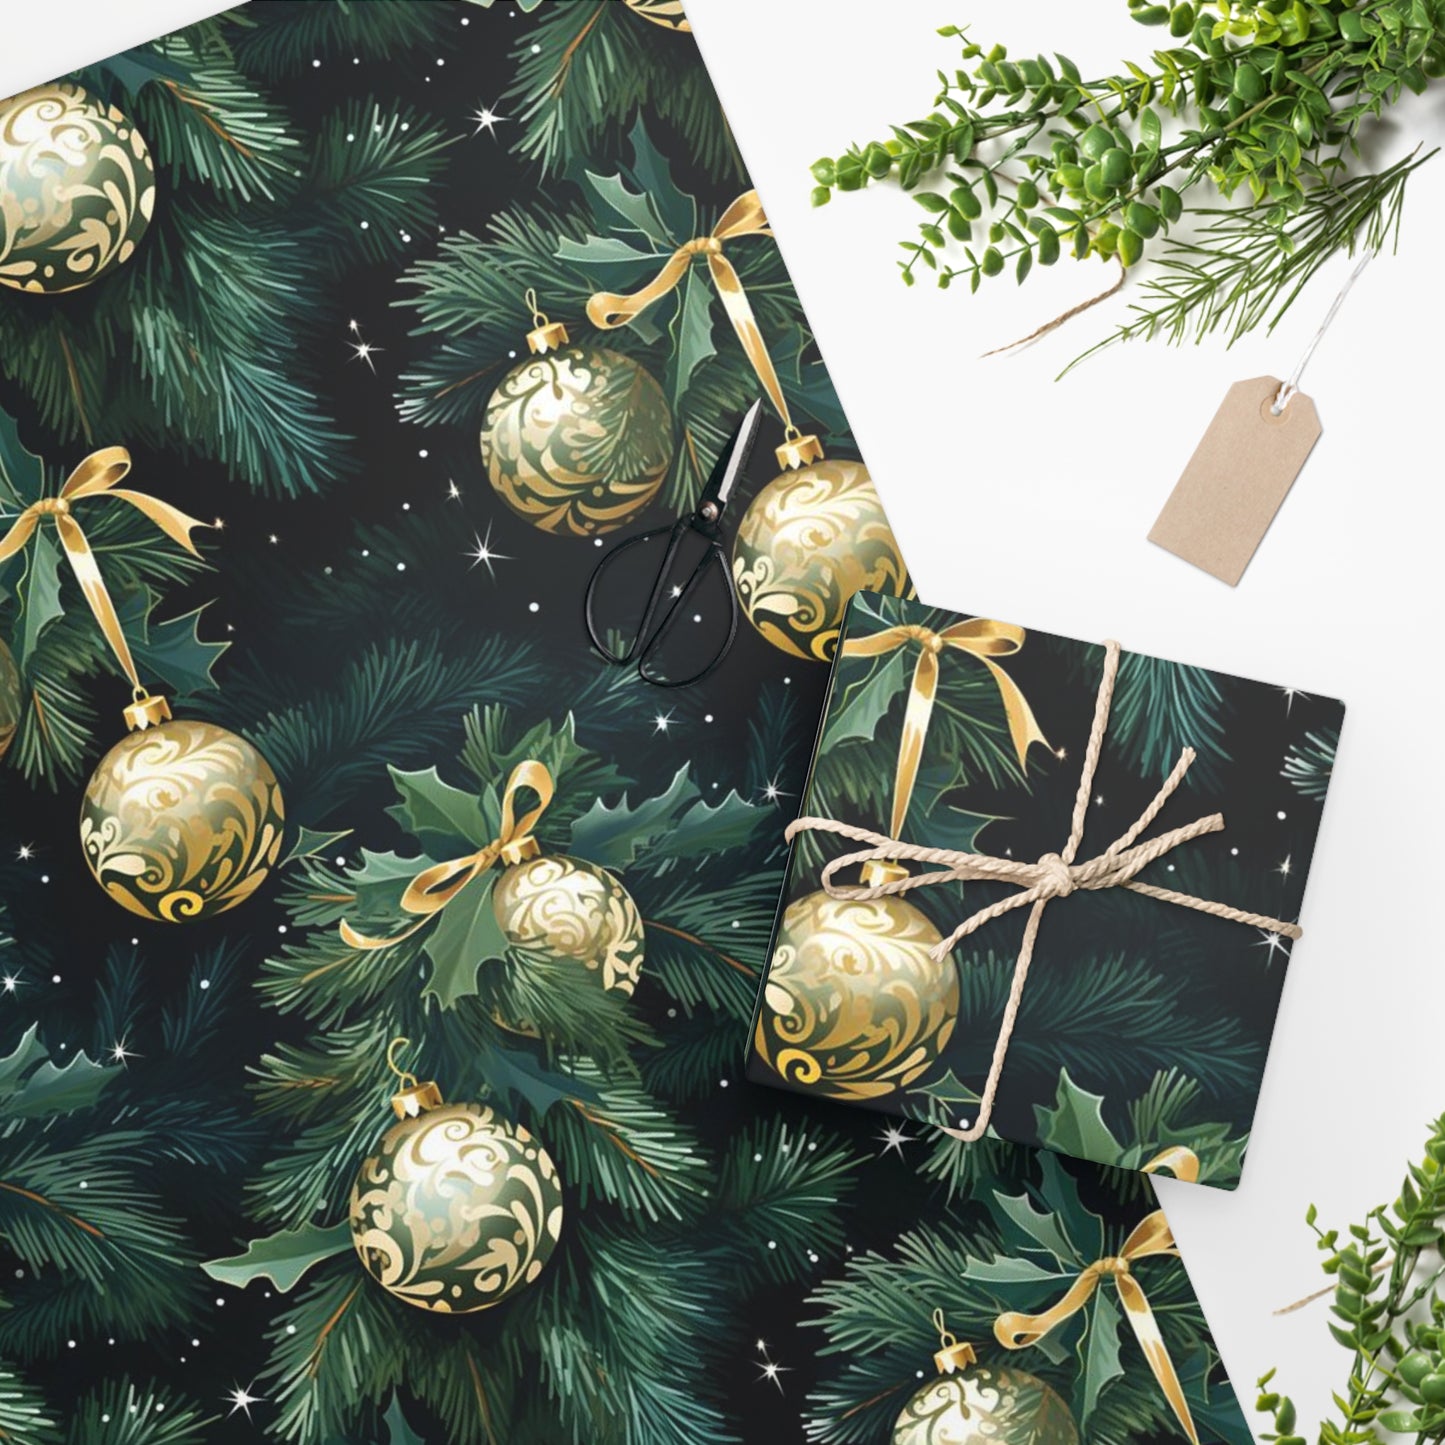 Vintage Floral Emerald Green Wrapping Paper by Sara Valor